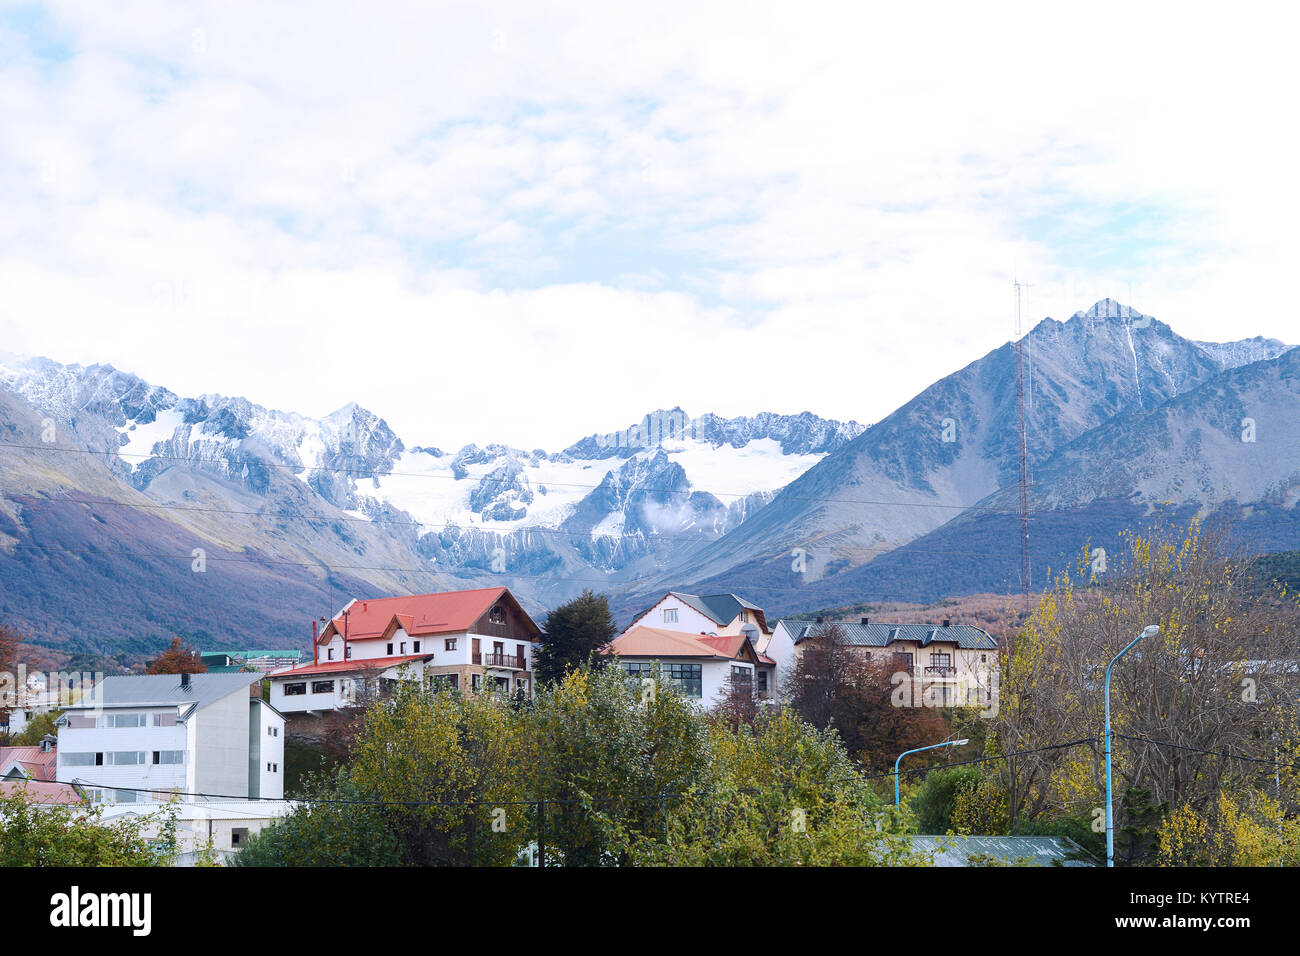 View of houses with snowy mountains at the back in Ushuaia, Patagonia, Argentina. Stock Photo